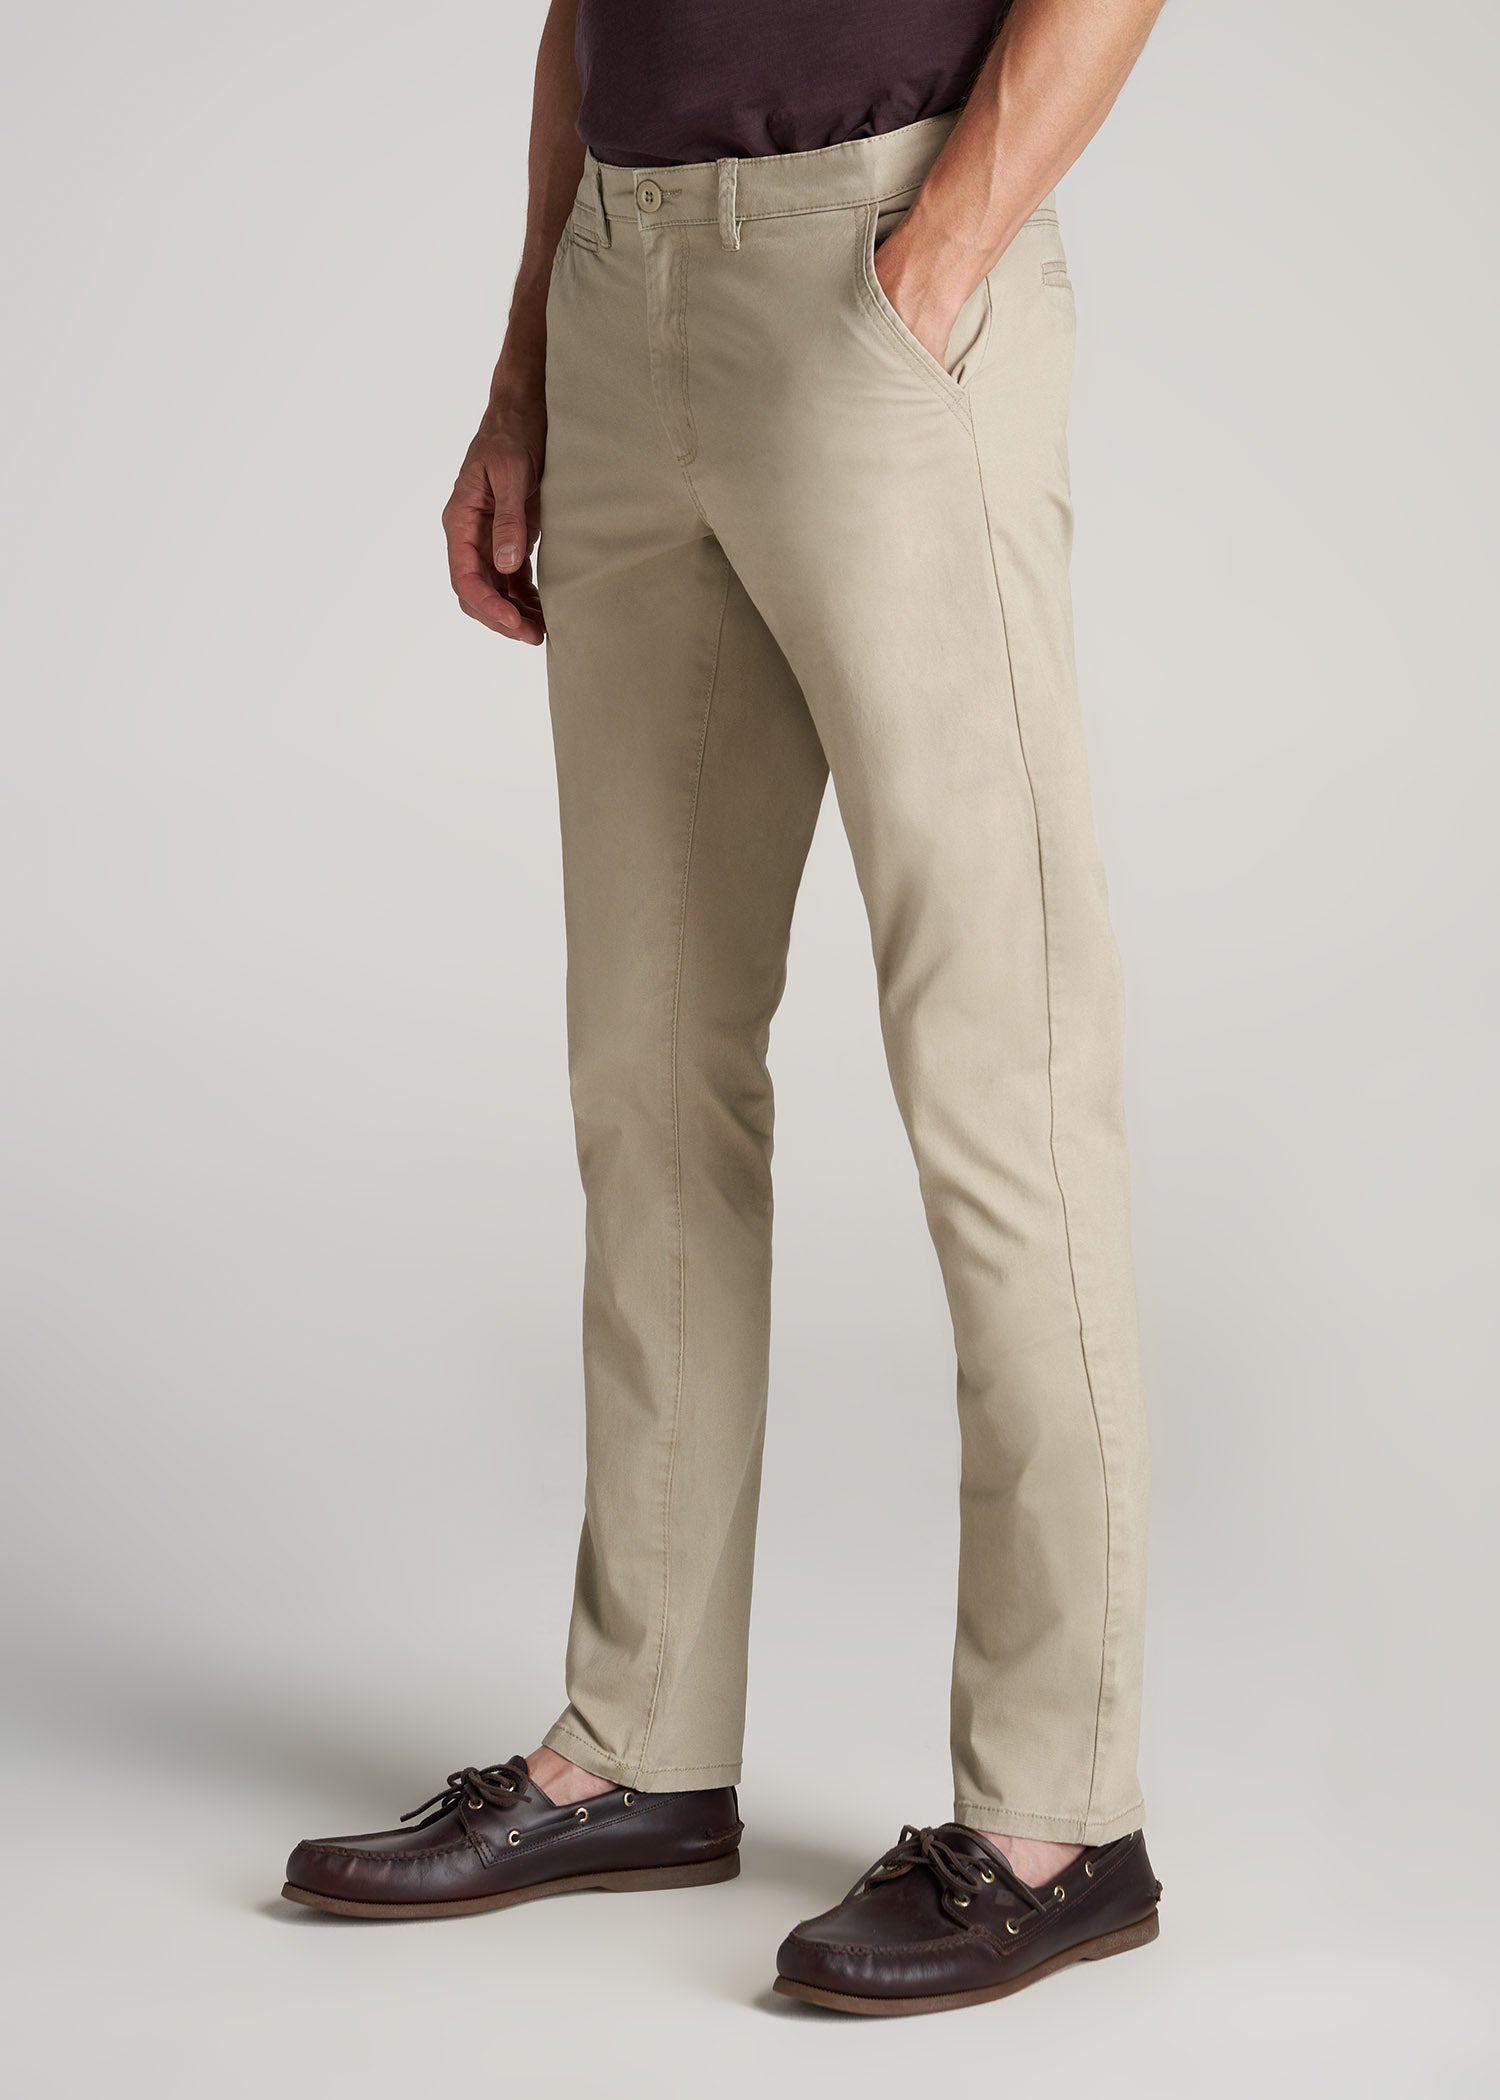 Dockers Men's Slim Tapered Easy Khaki Pants With Stretch